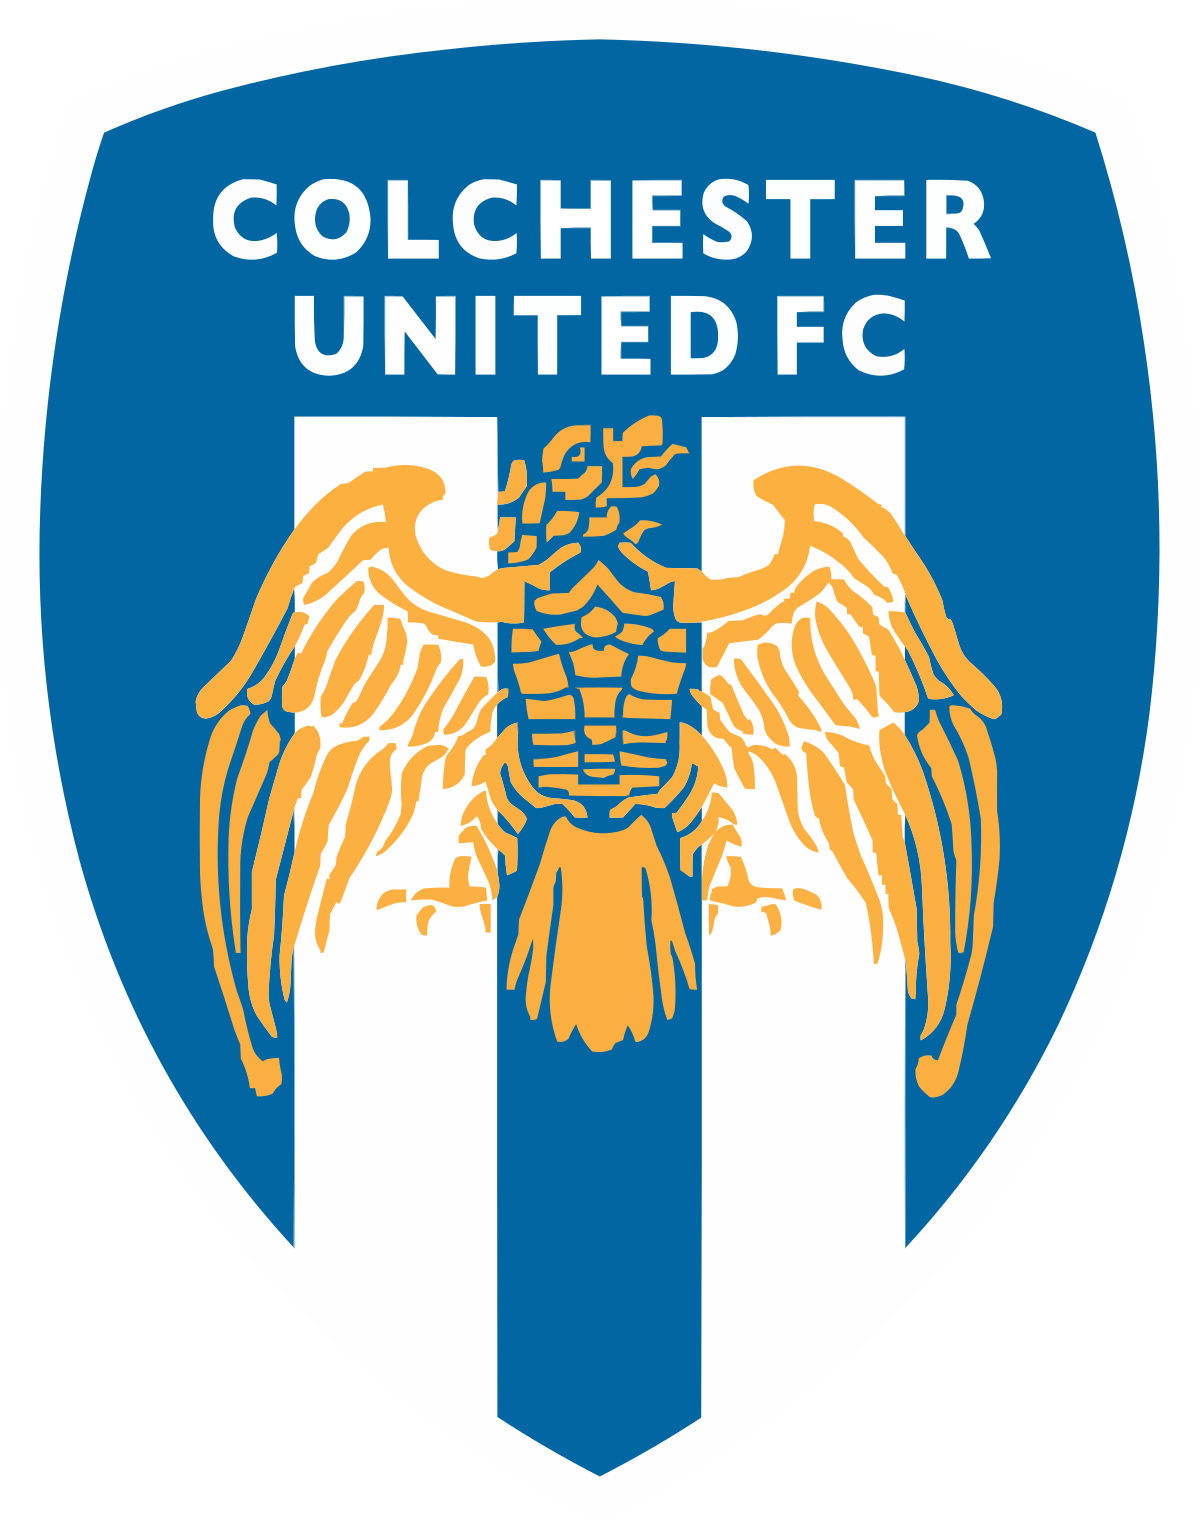 The U’s Looking Up: Can Colchester United Avoid the Drop?